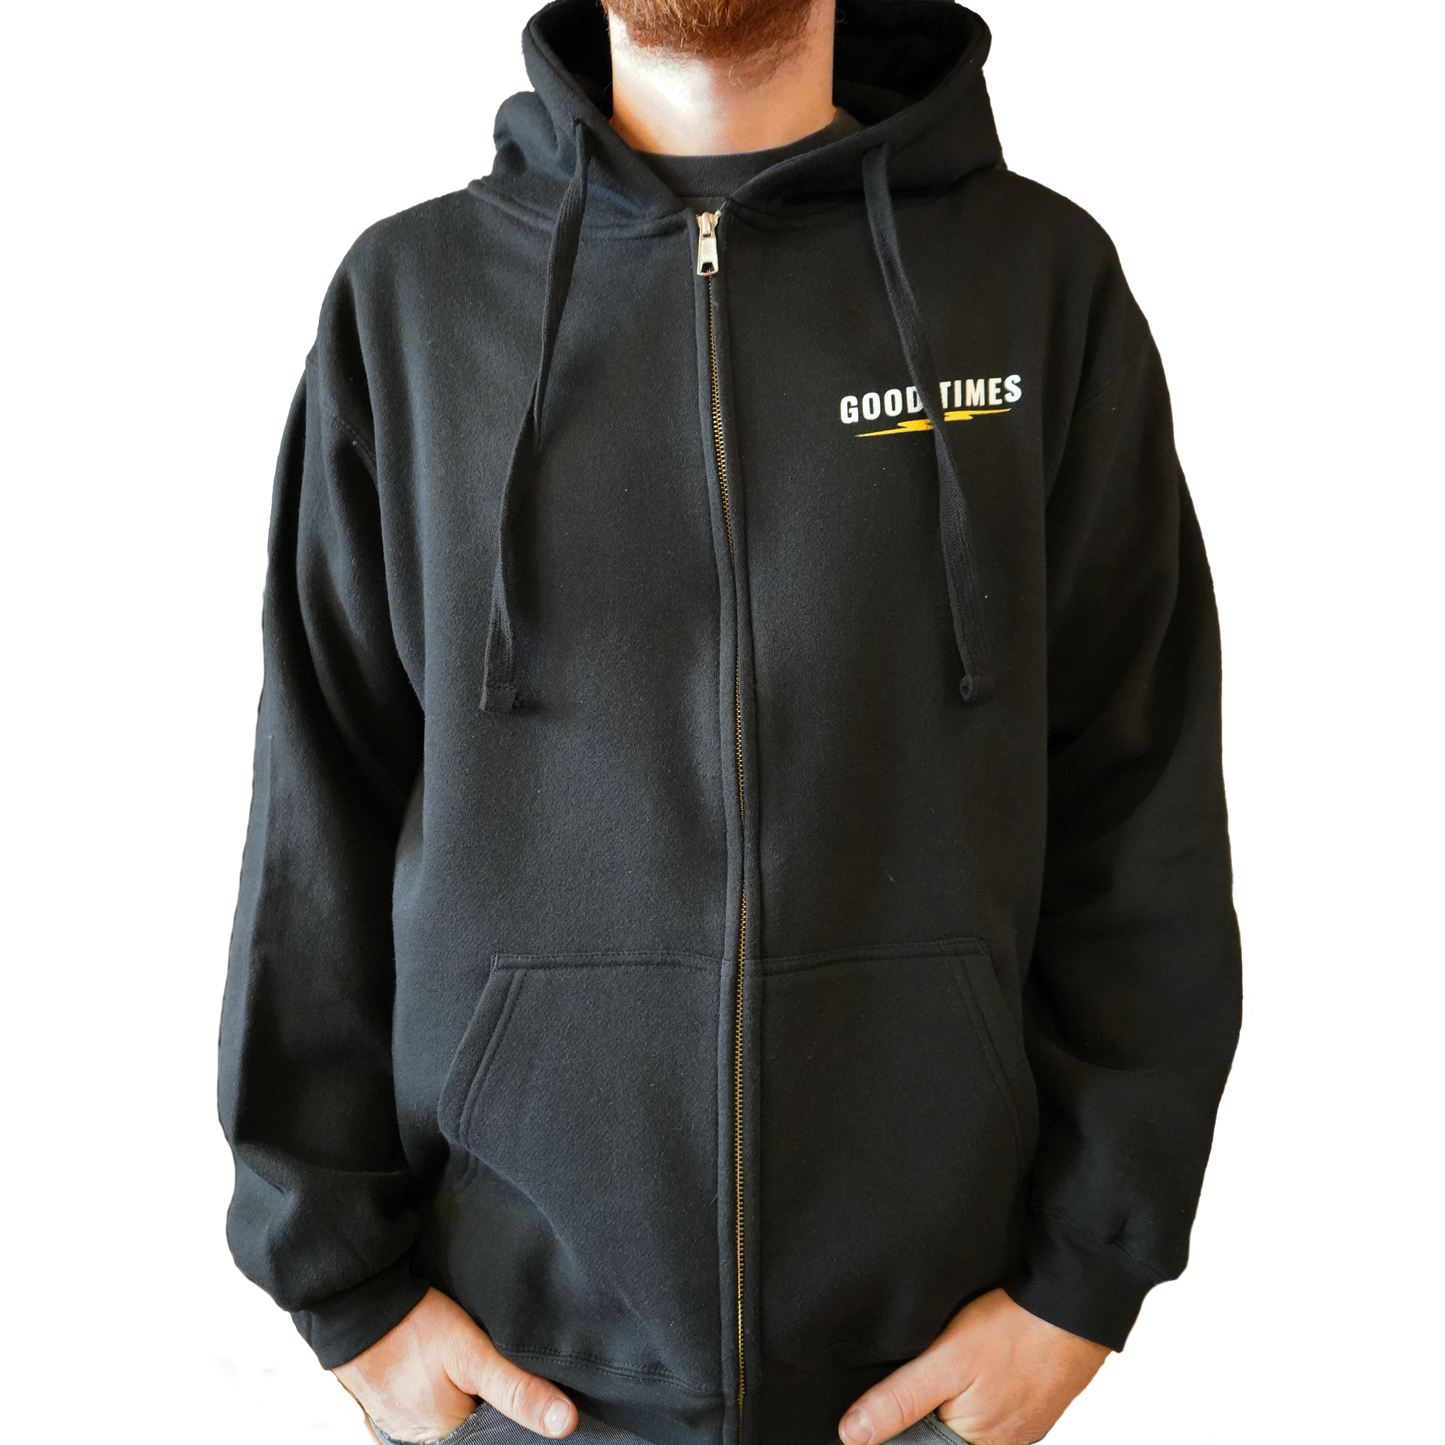 Good Times Wrench Hand Strong Zip Up Hoodie